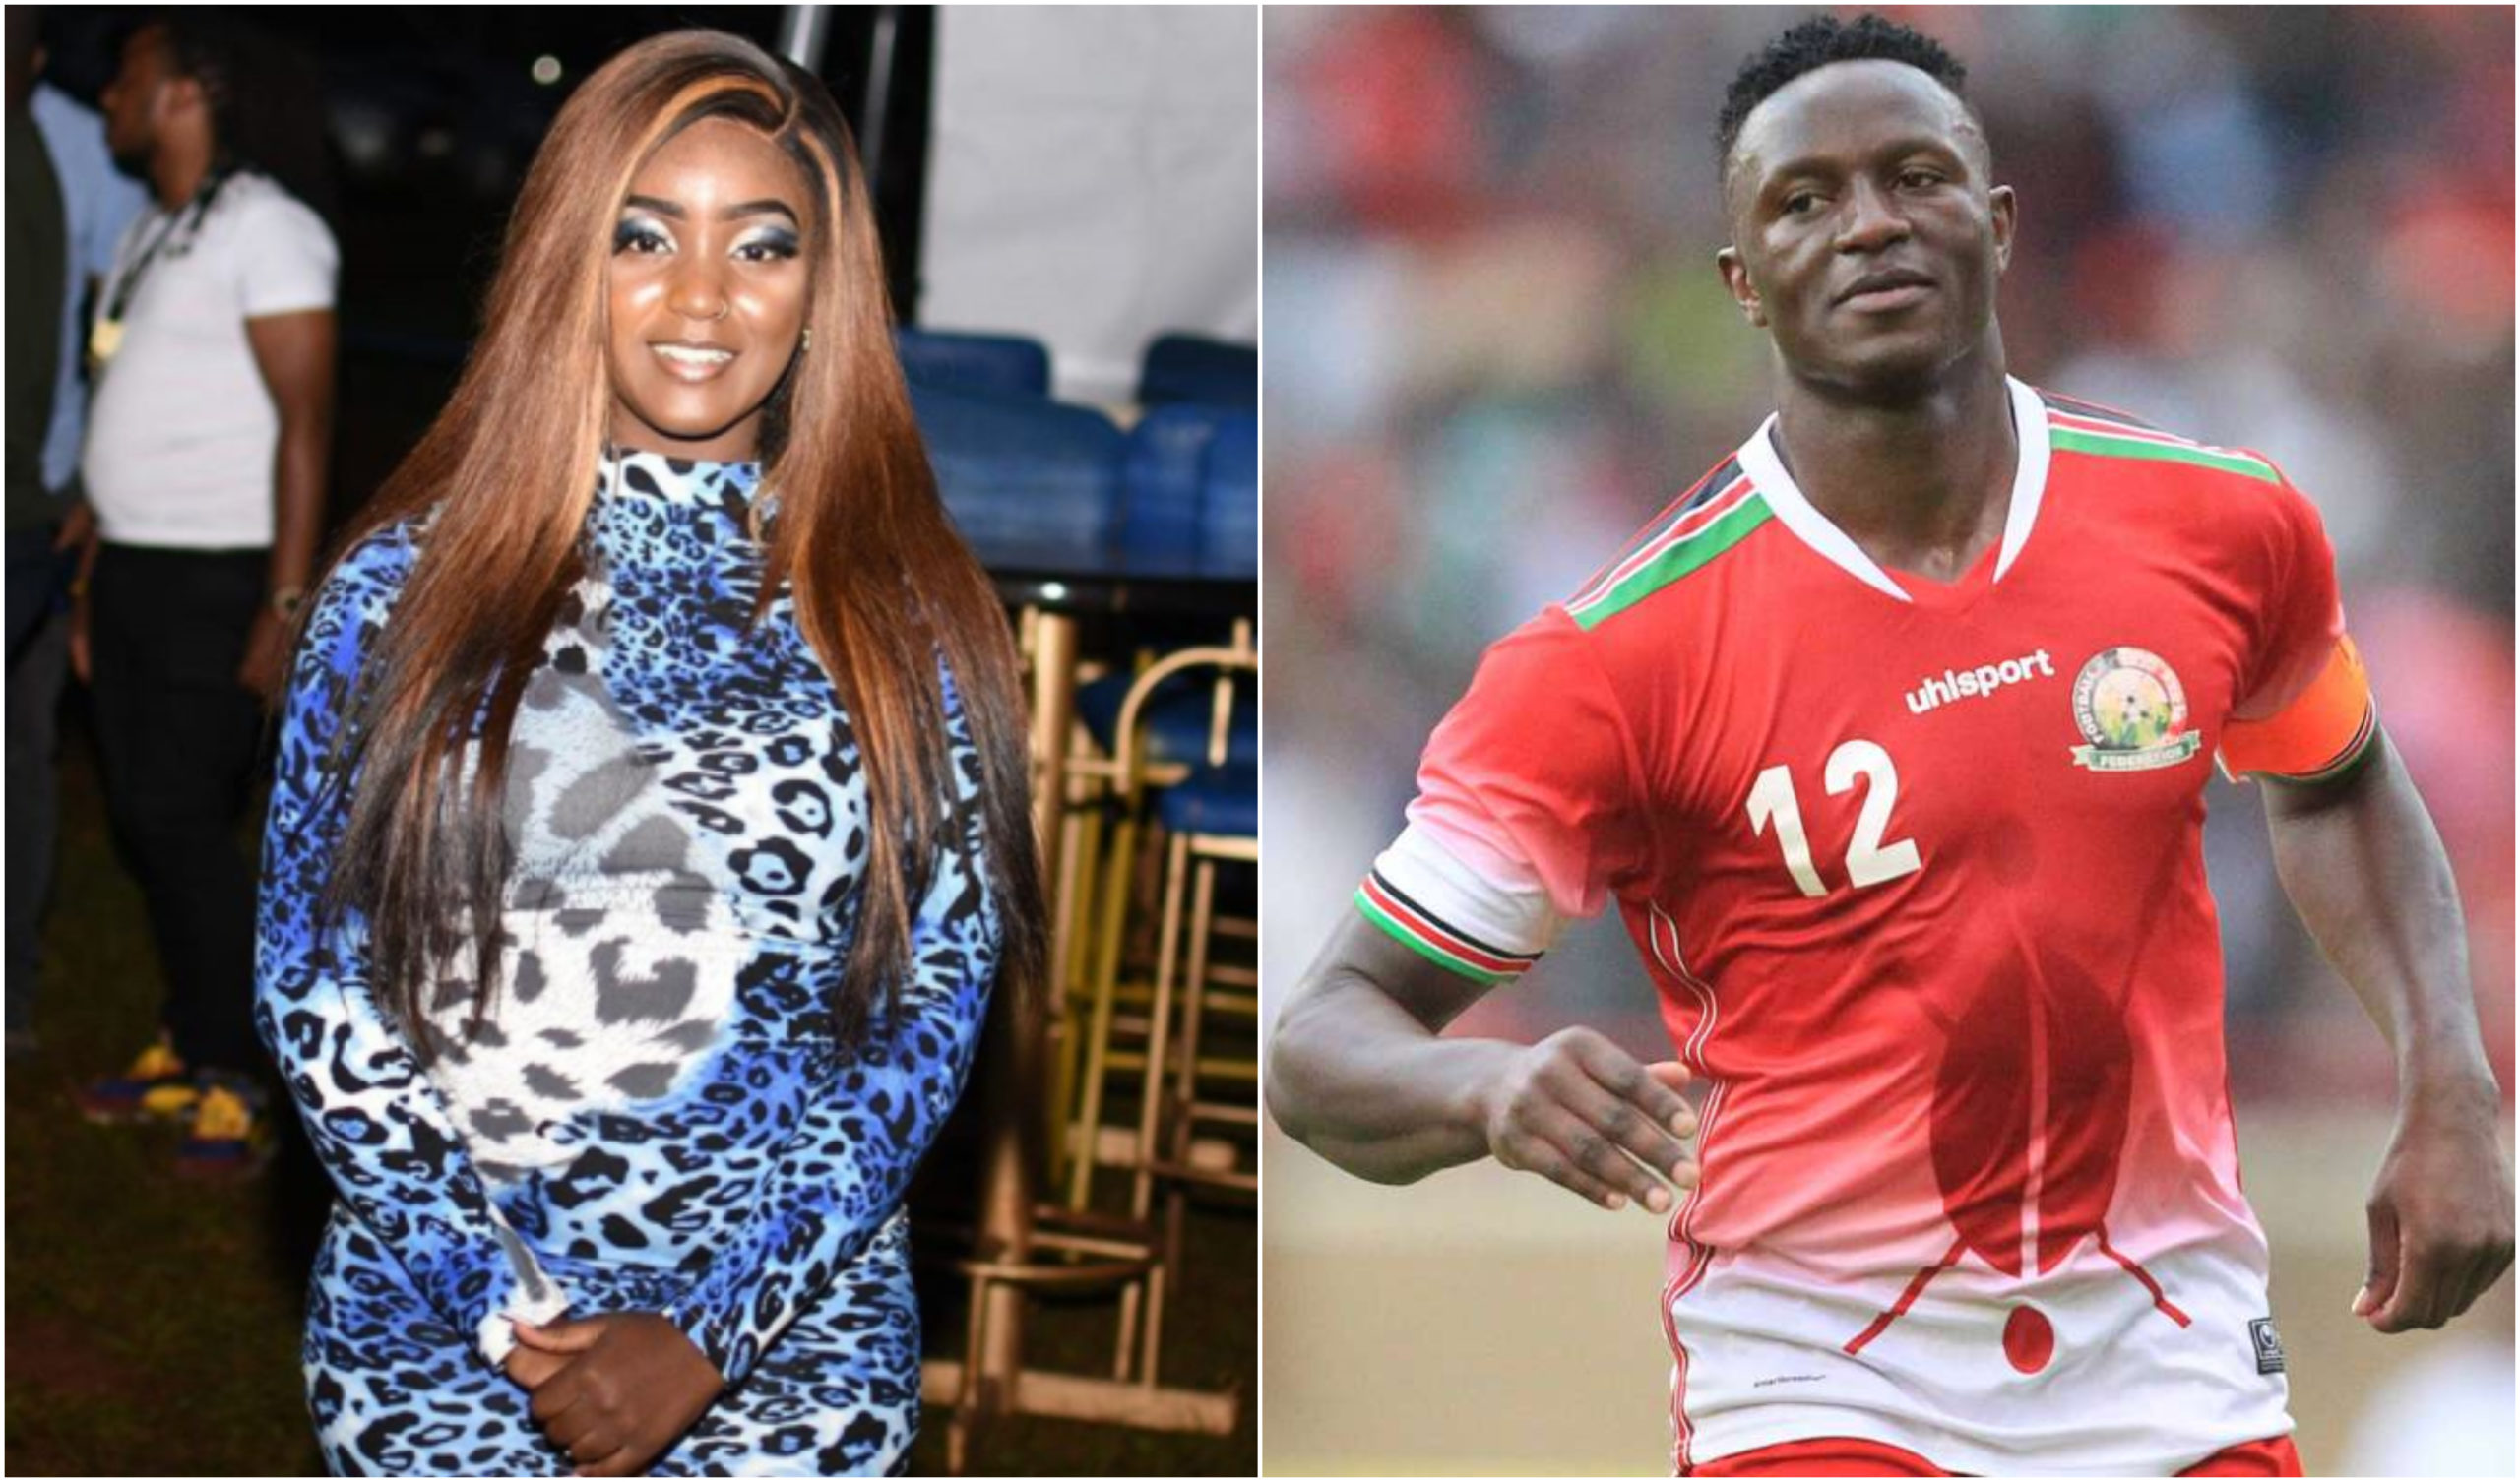 Shakilla finally makes public apology to Victor Wanyama over intimacy scandal (Video)